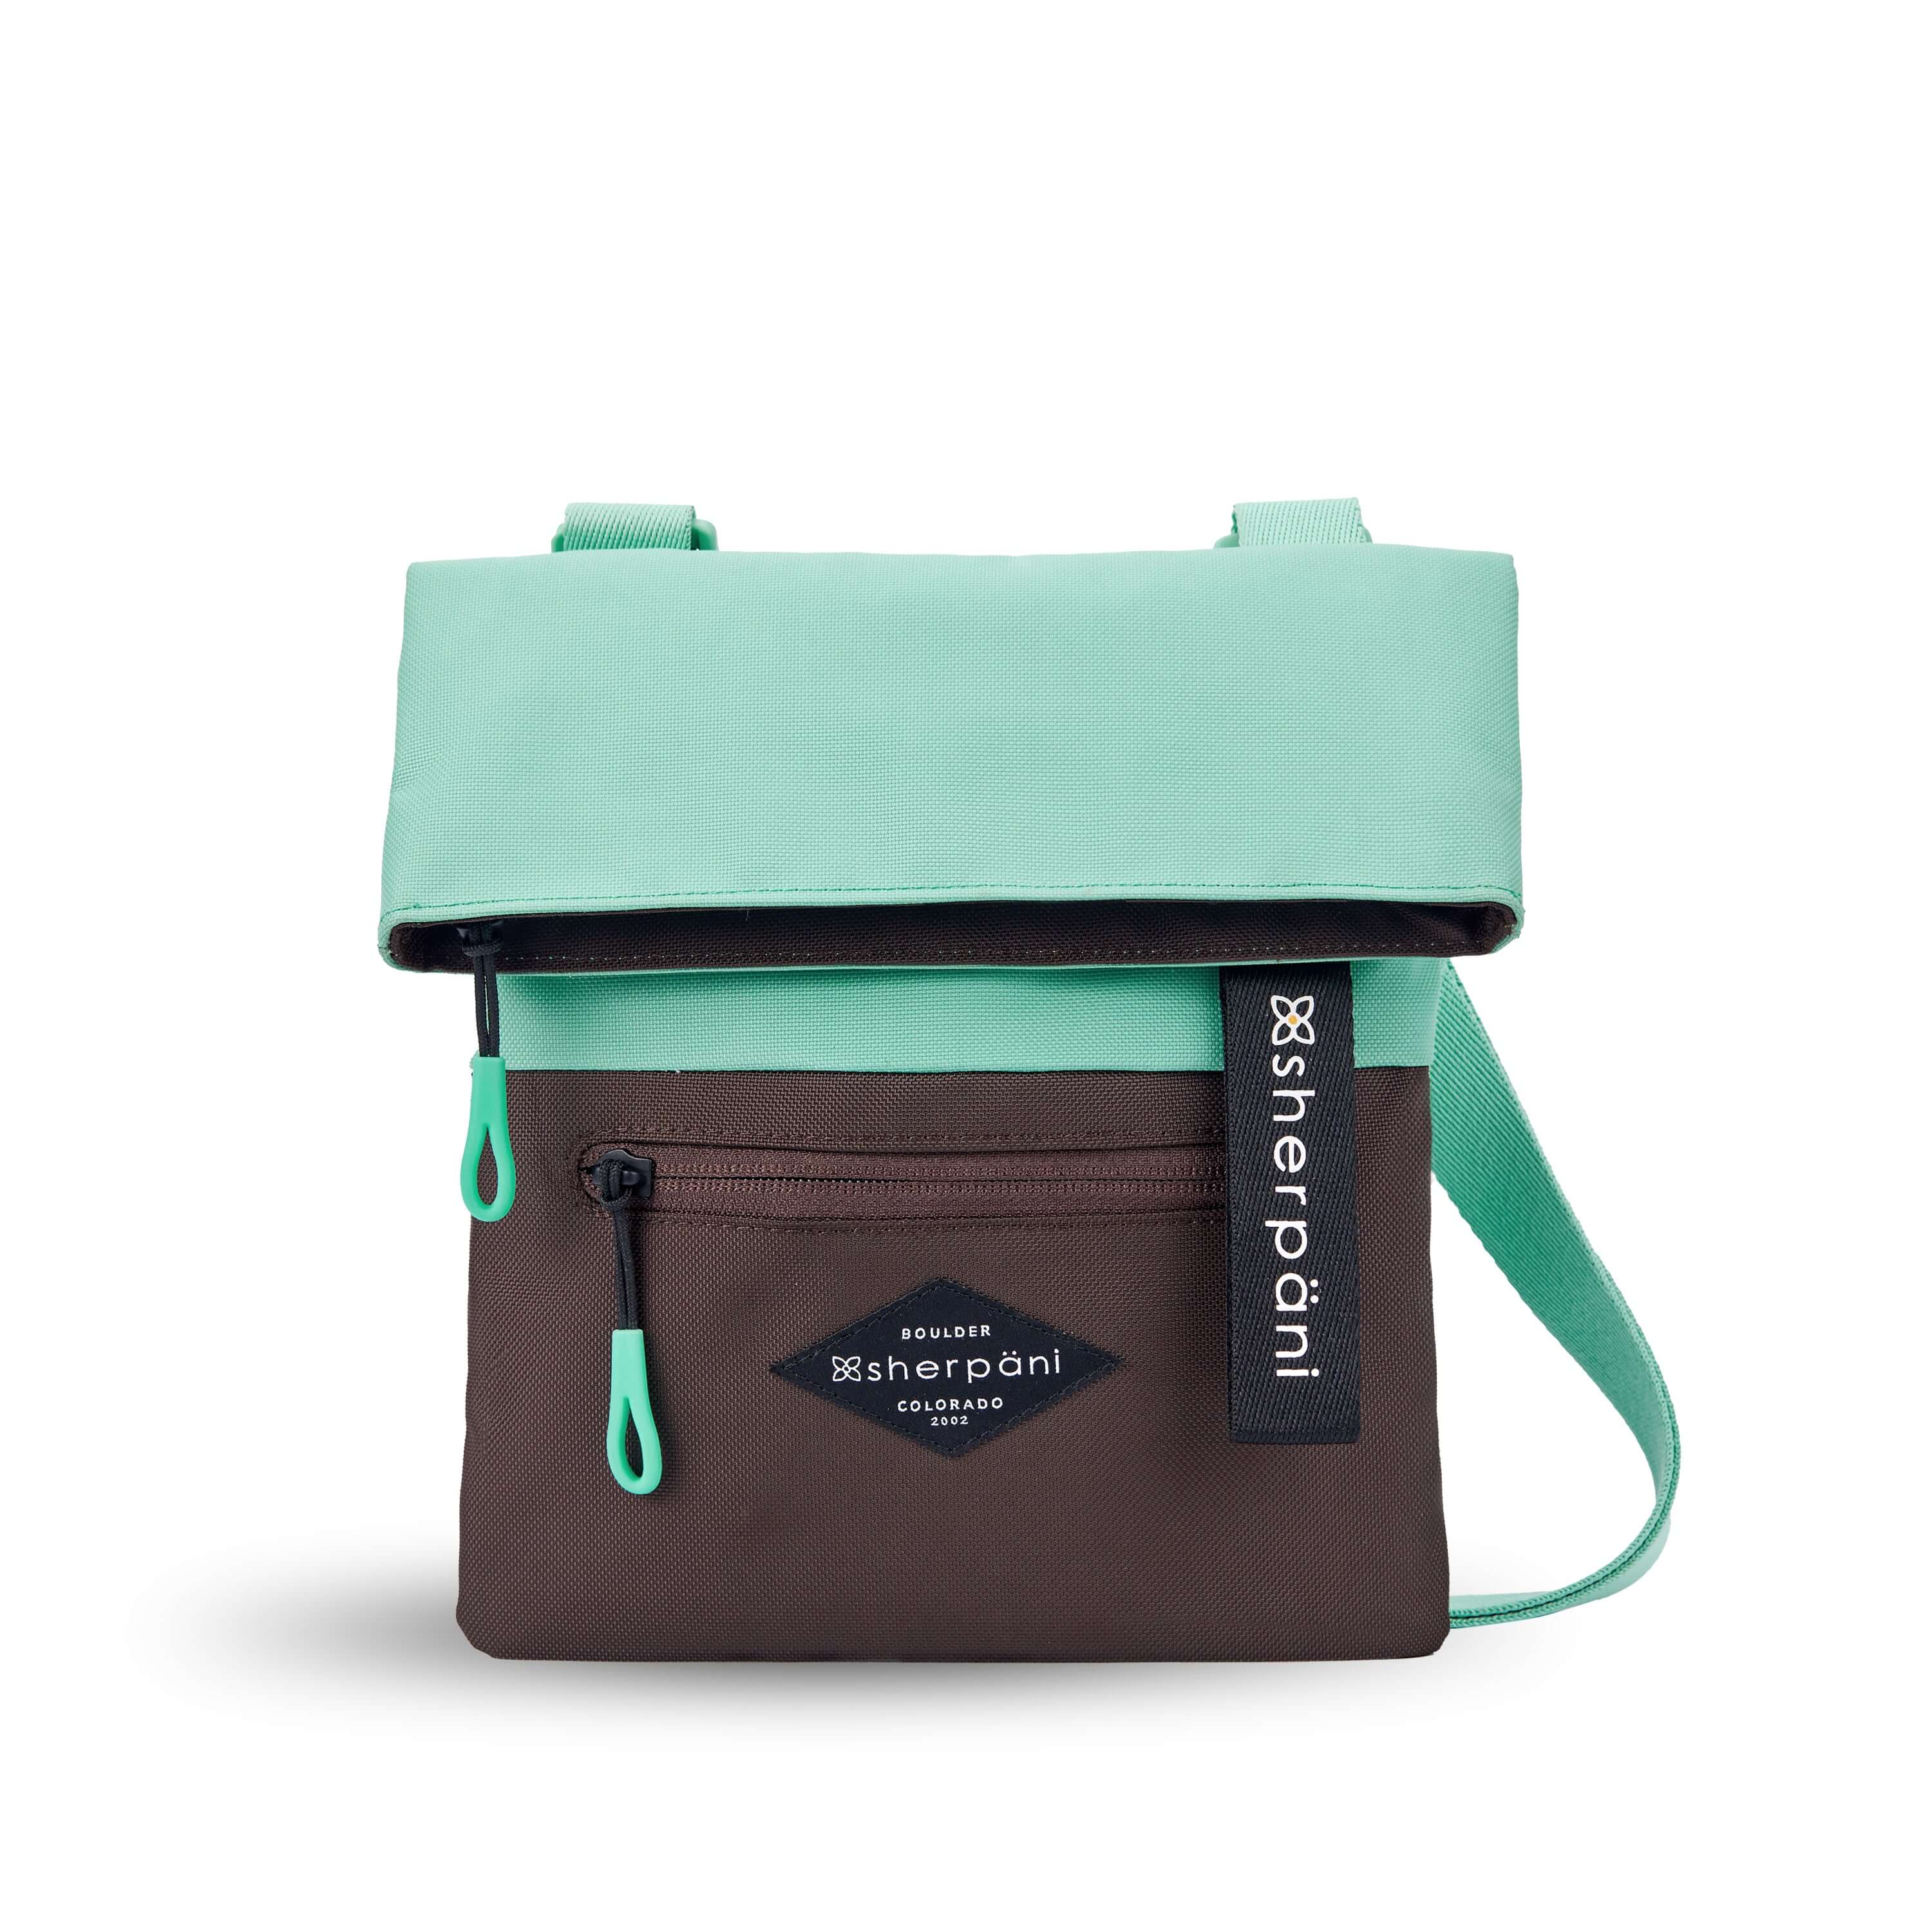 Flat front view of Sherpani crossbody, the Pica in Seagreen. The bag is two toned: the top half is light green and the bottom half is brown. There is an external zipper pocket on the front panel. Easy-pull zippers are accented in light green. The top of the bag folds over creating a signature look. A branded Sherpani keychain is clipped to the upper right corner. The bag has an adjustable crossbody strap. 